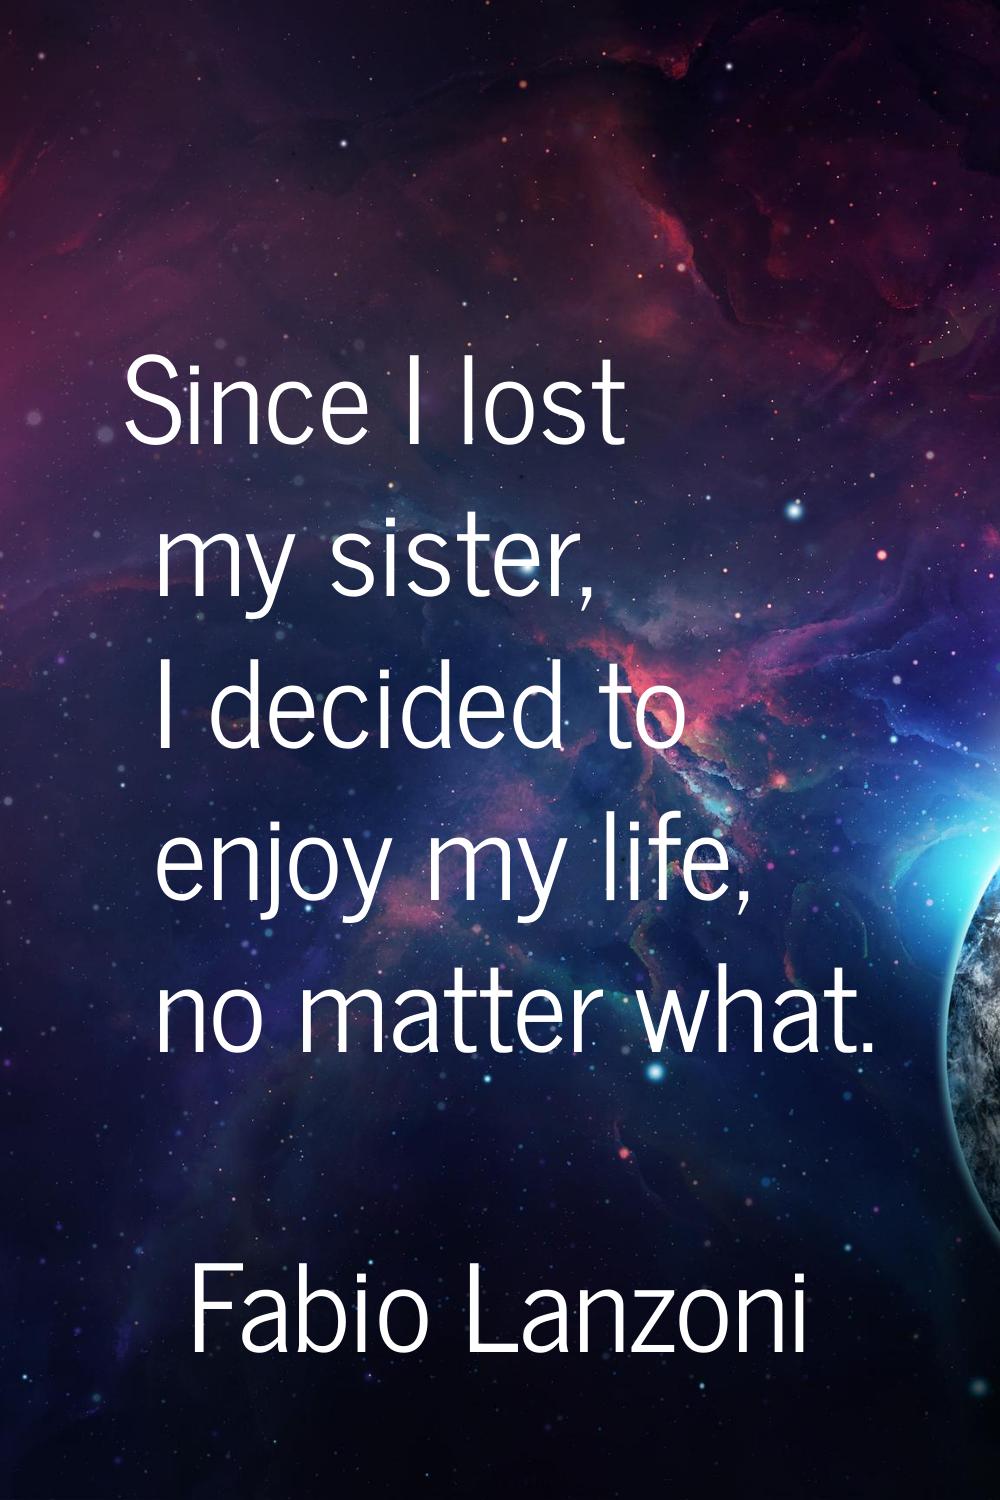 Since I lost my sister, I decided to enjoy my life, no matter what.